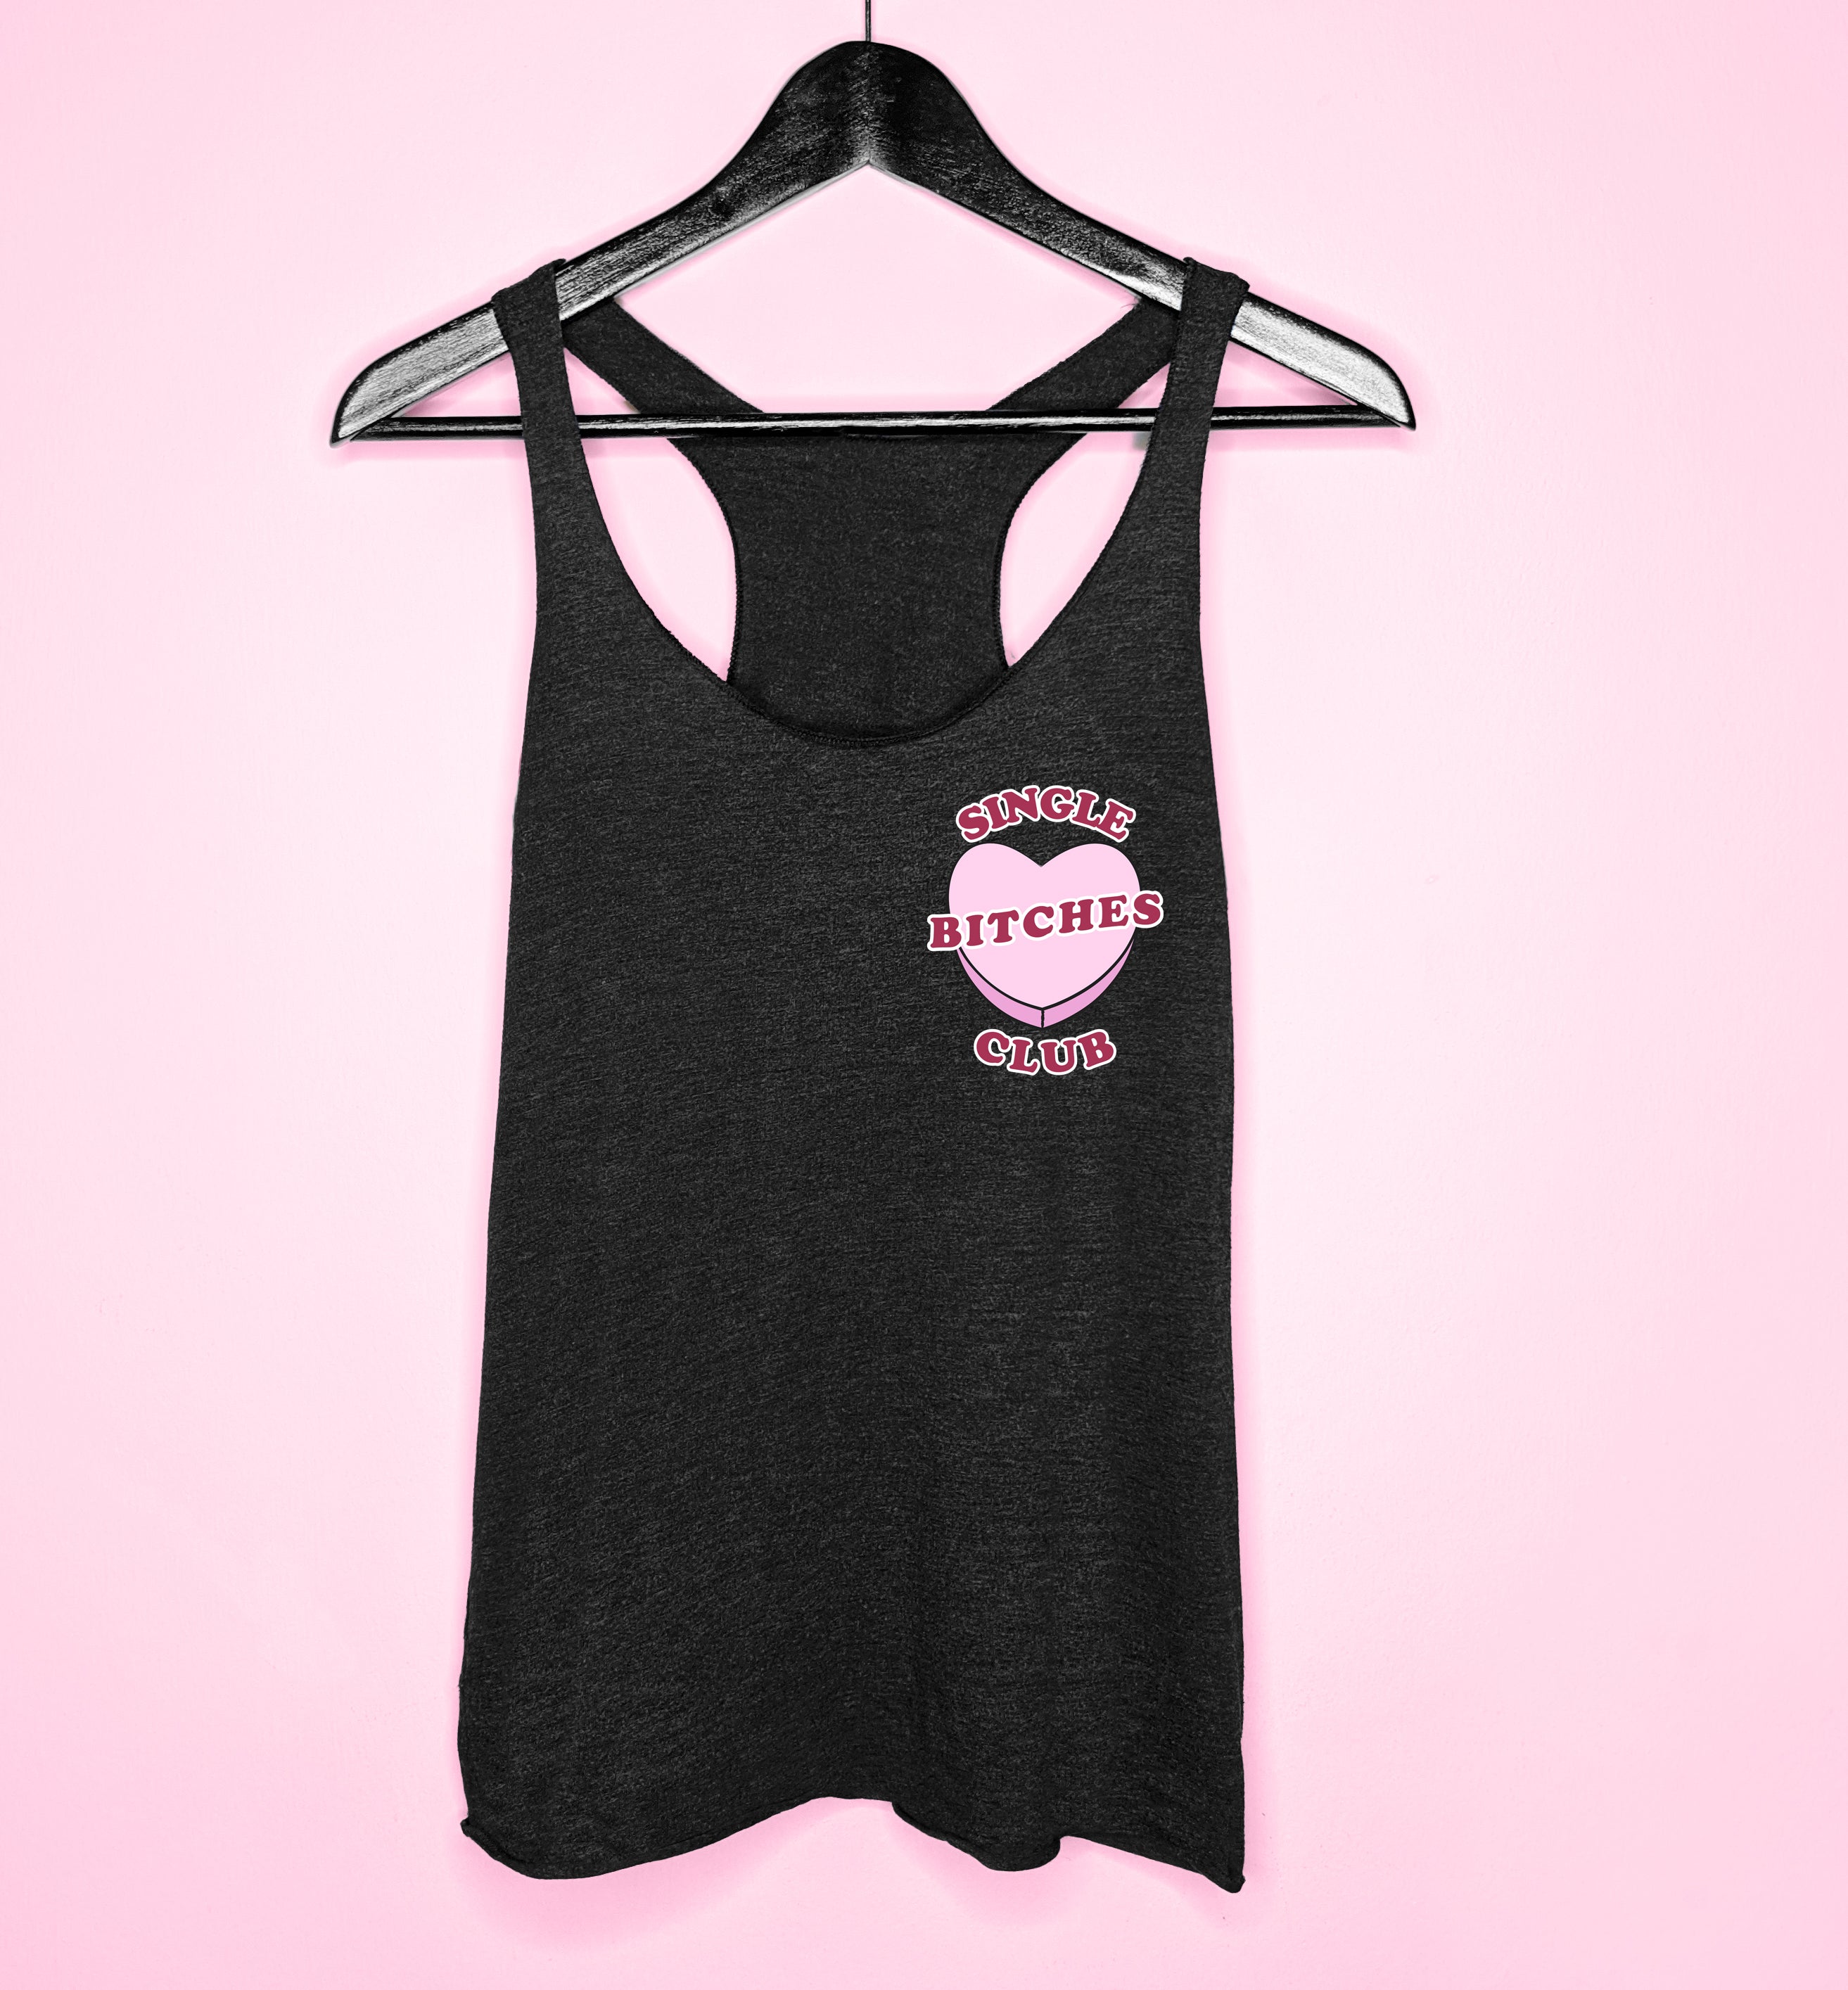 Black tank top with a candy heart saying single bitches club - HighCiti